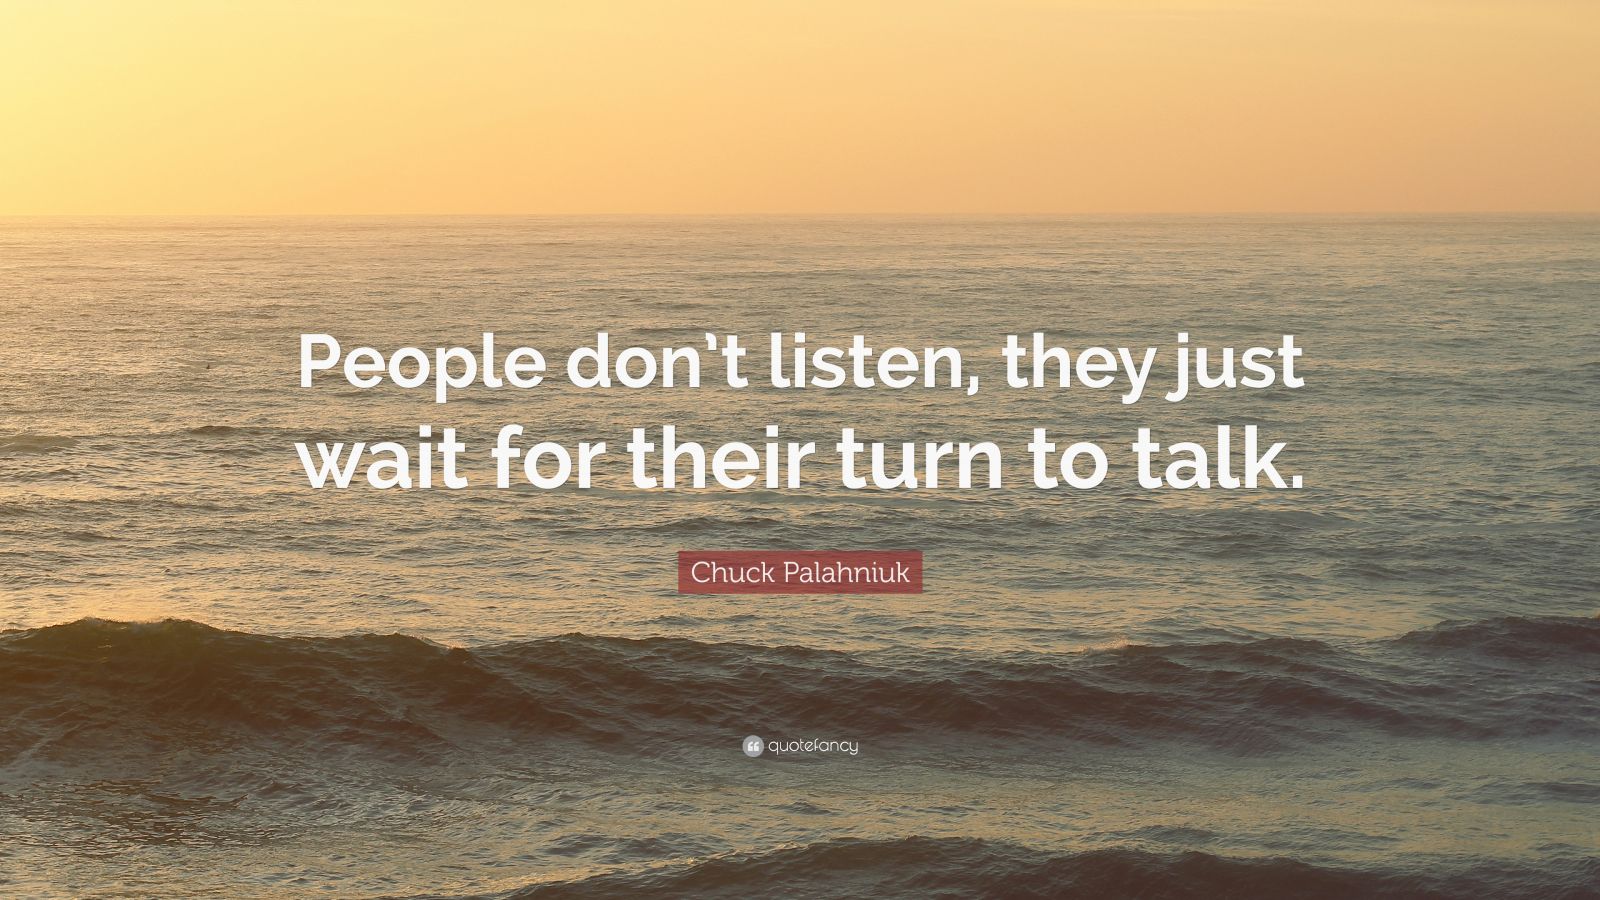 Chuck Palahniuk Quote: “People don’t listen, they just wait for their ...